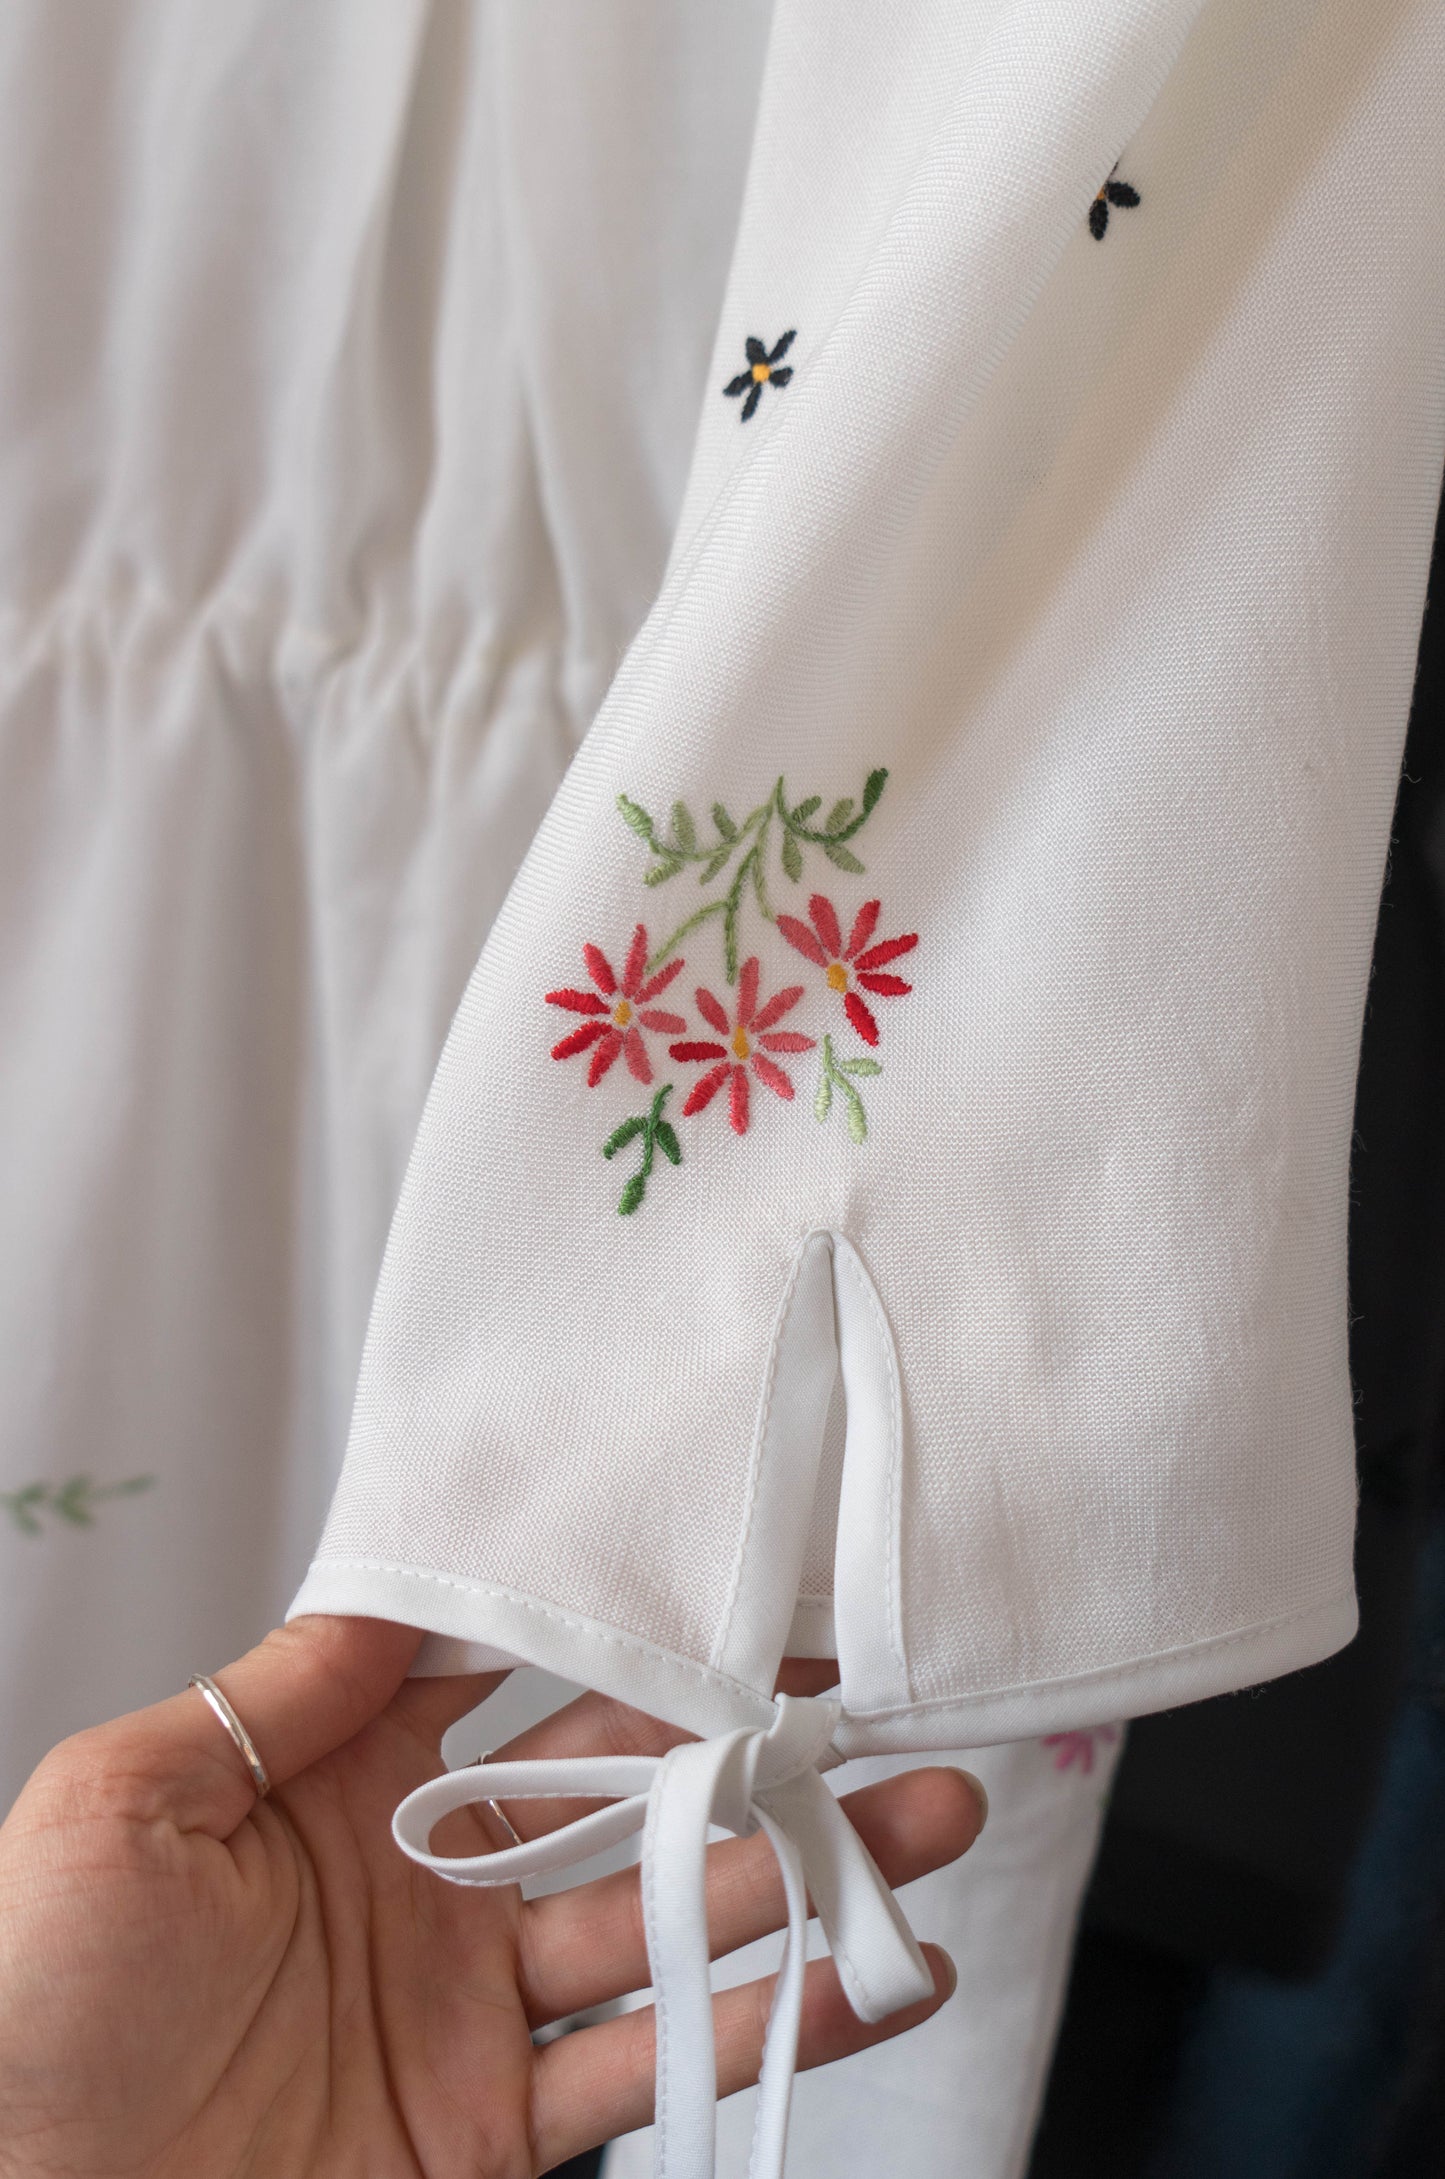 Tall Fit Embroidered Blouse